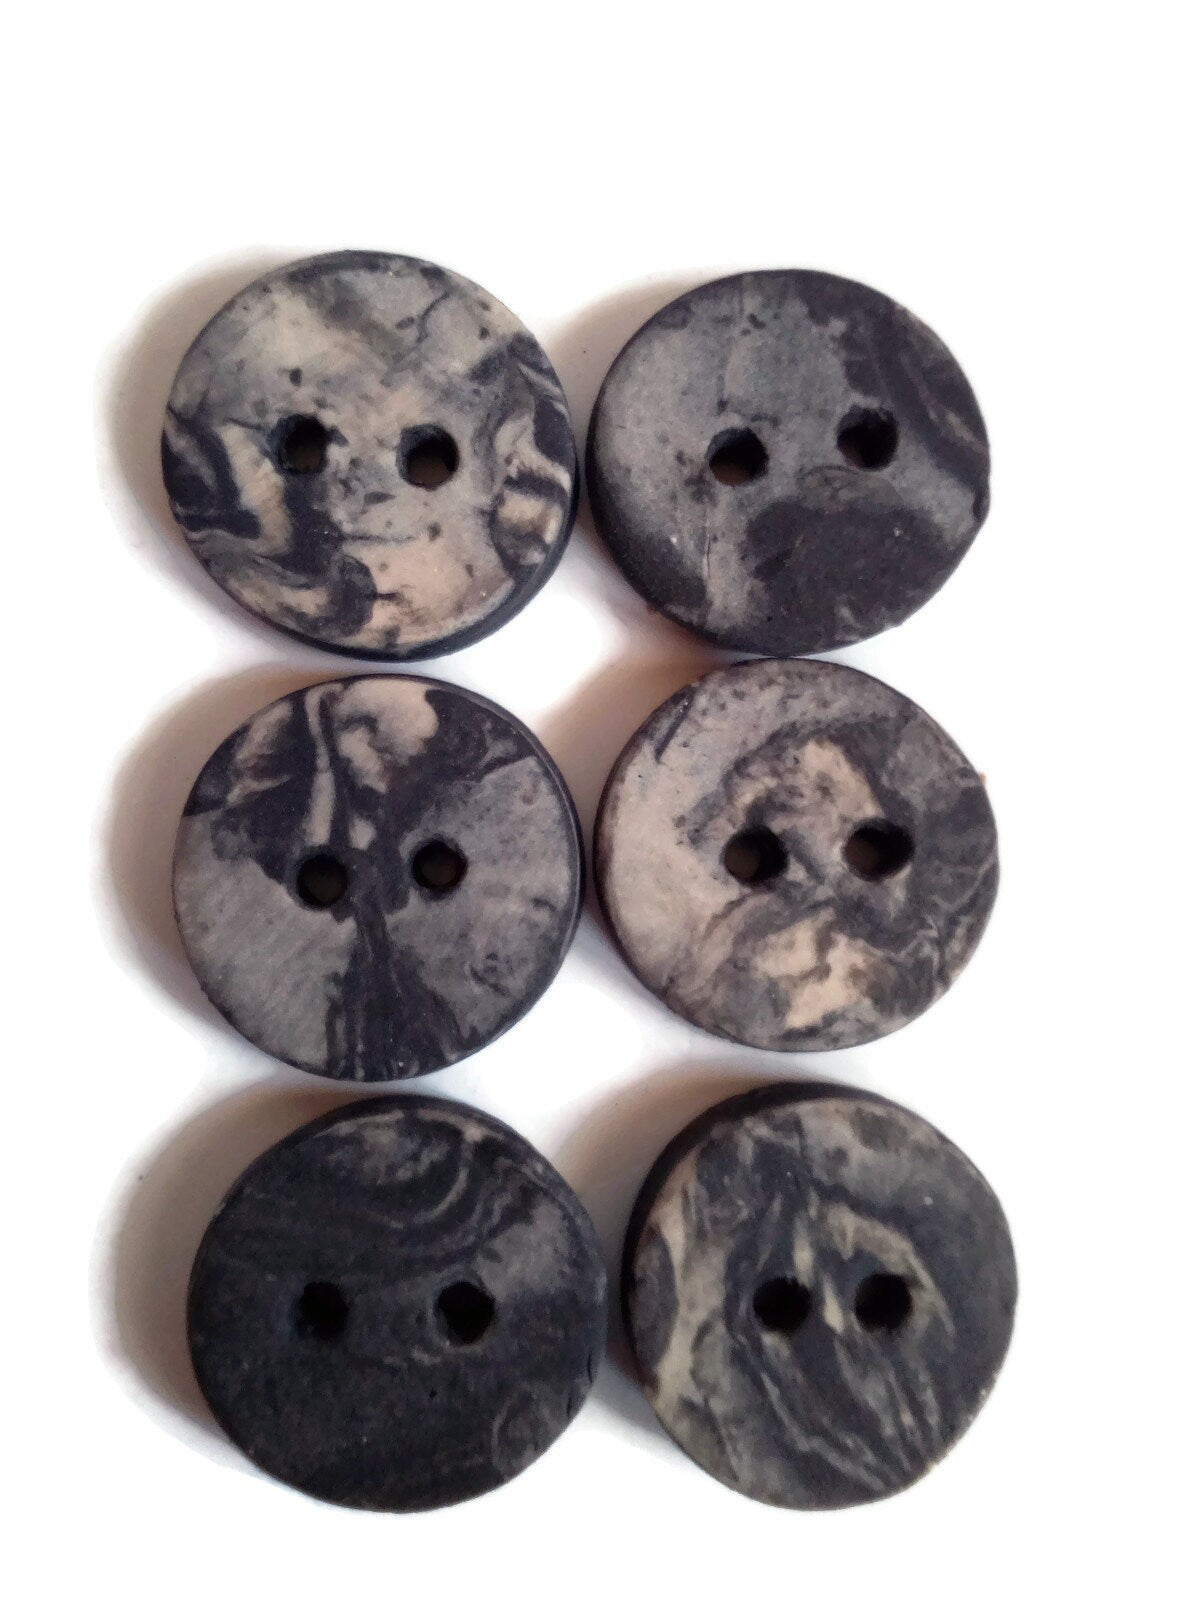 6PC 25mm Matte Black And White Handmade Ceramic Buttons for Knitting, 2 Hole Flat Back Marbled Sewing Buttons For Coat Best Sellers - Ceramica Ana Rafael